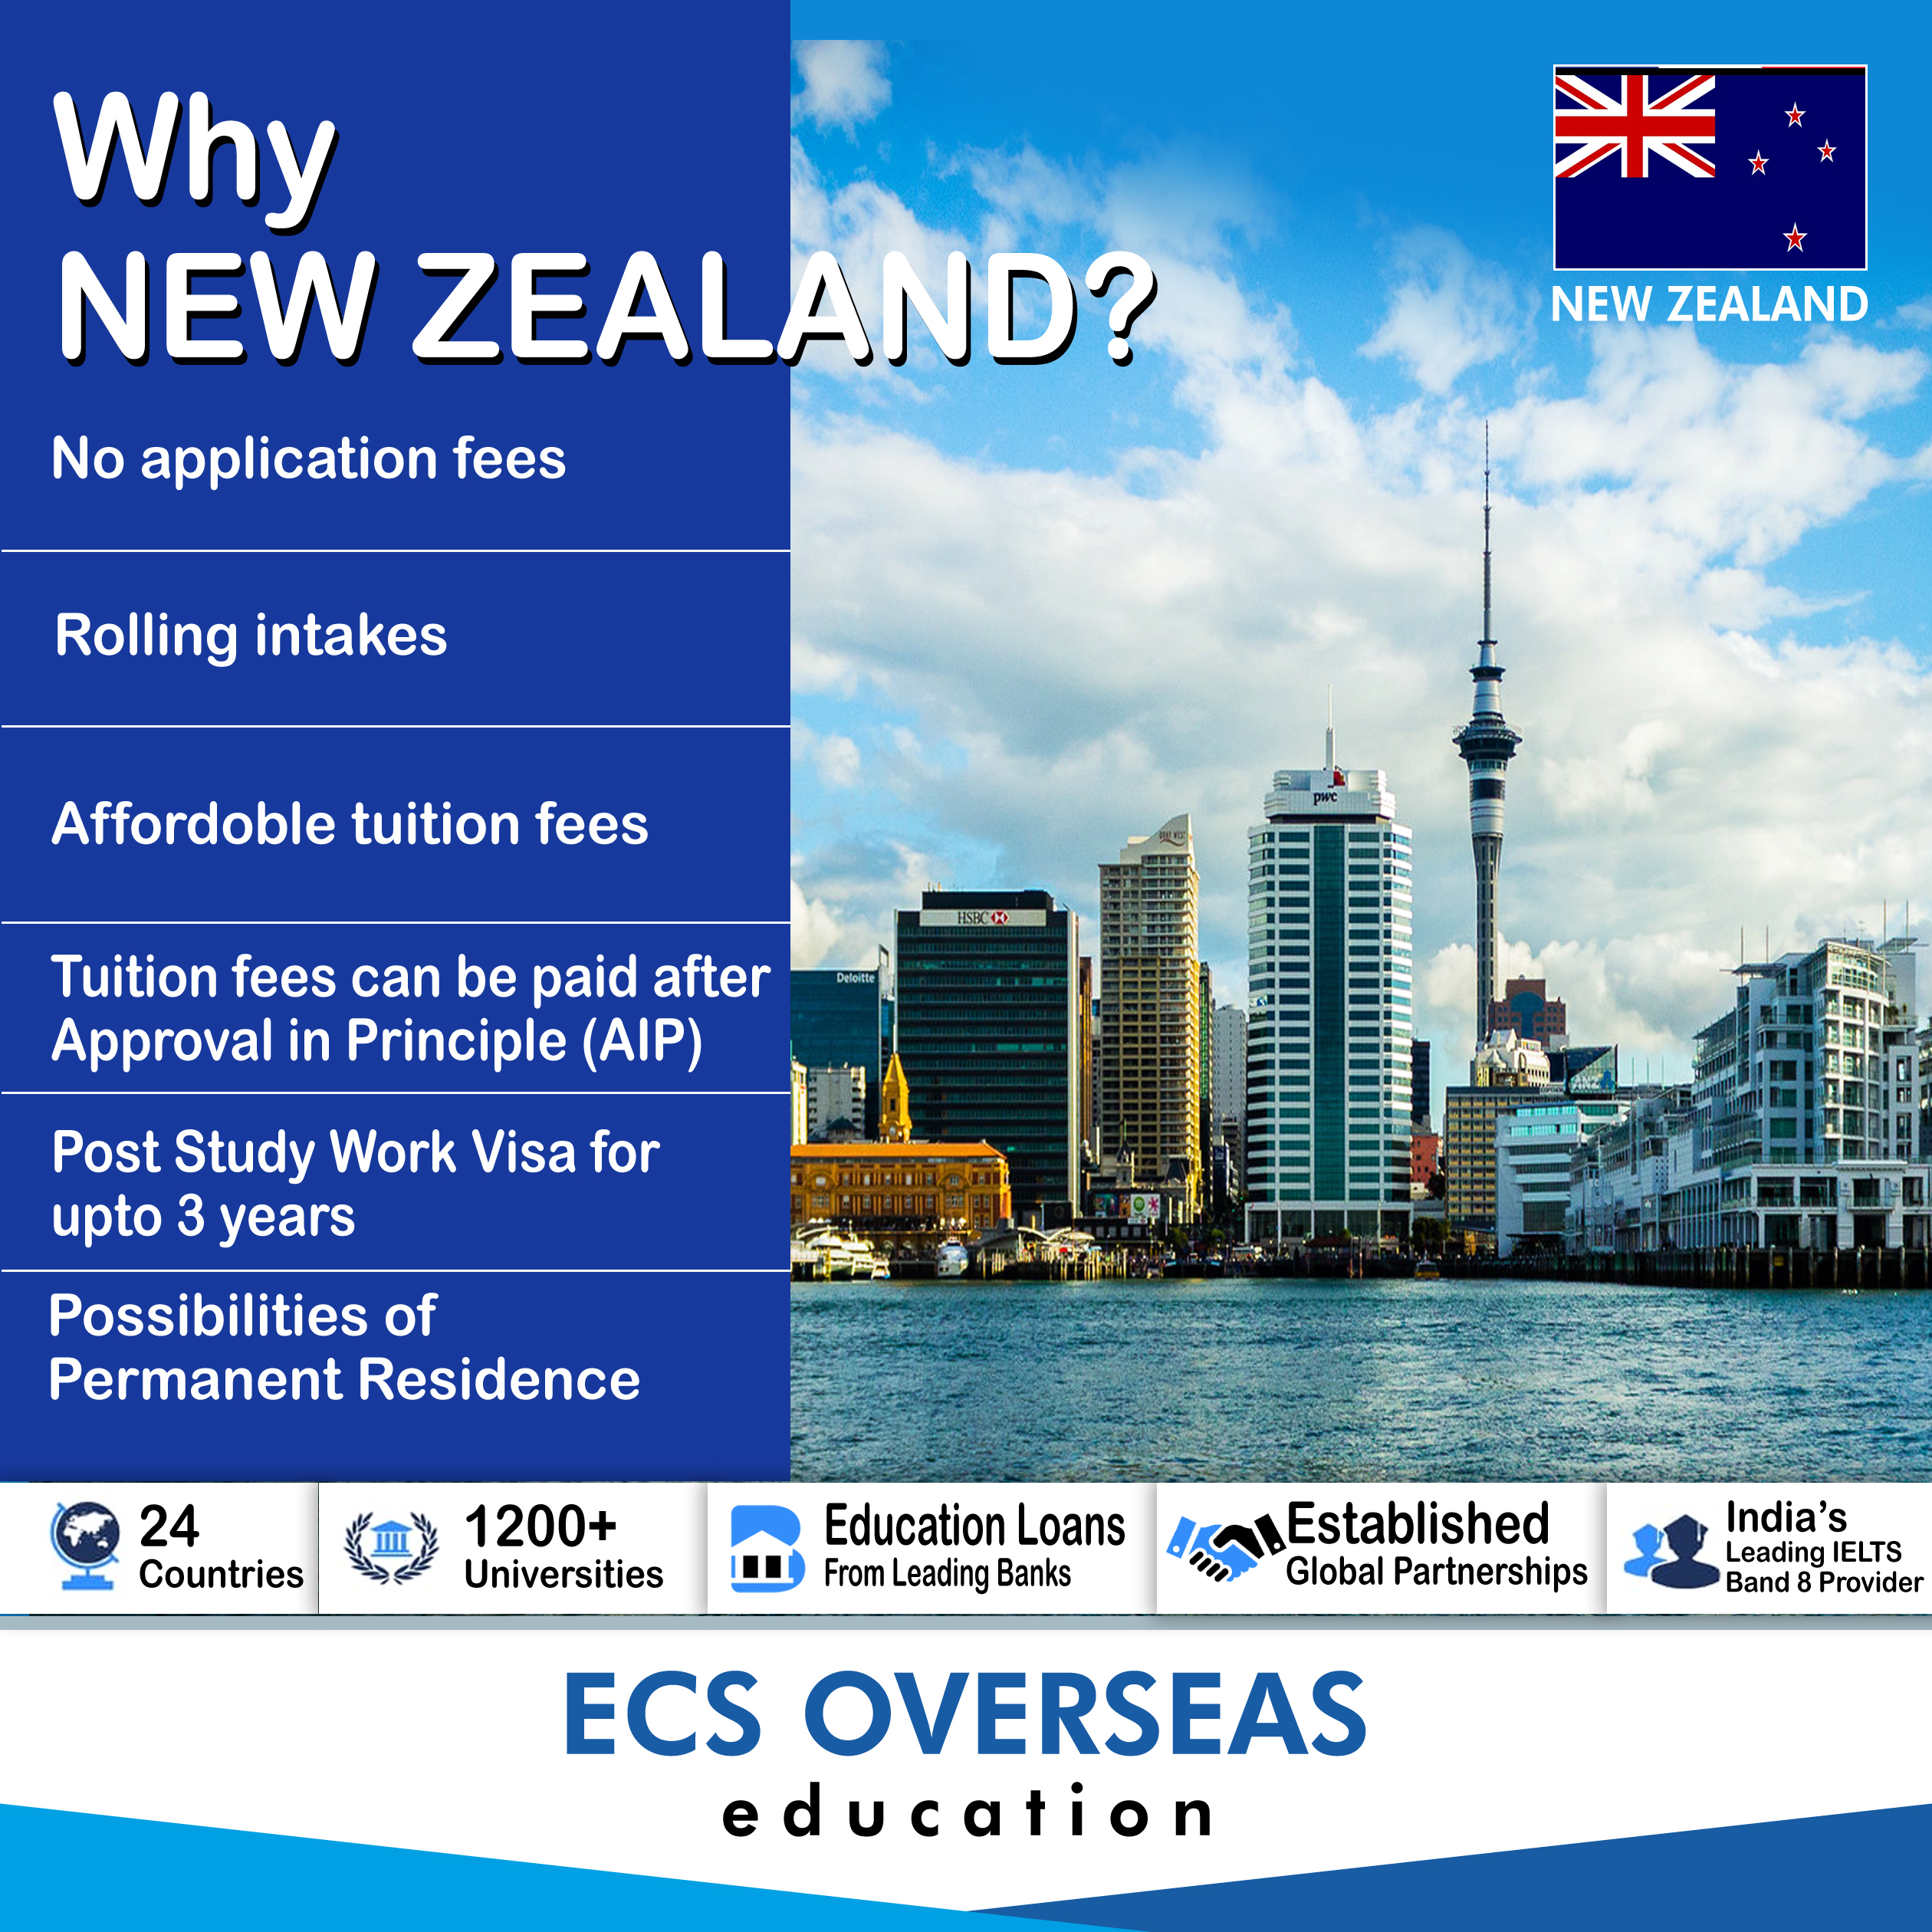  Overseas education consultants for New Zealand